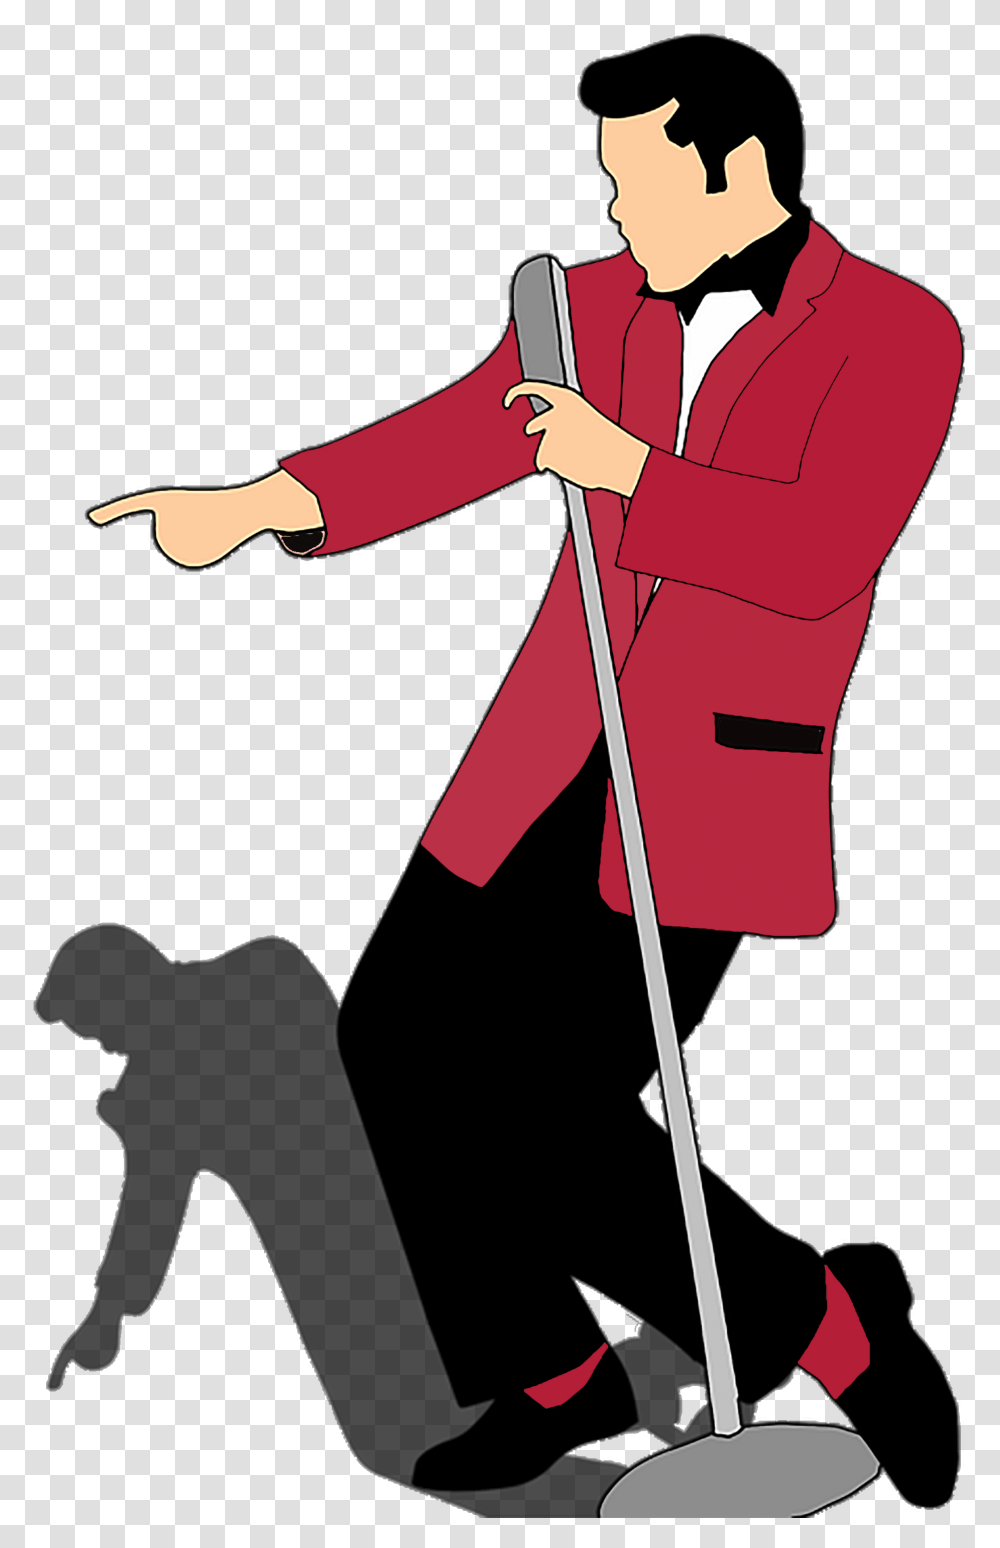 Microphone Drawing Singing Musician Animated Images Of A Singer, Person, Performer, Clothing, Face Transparent Png